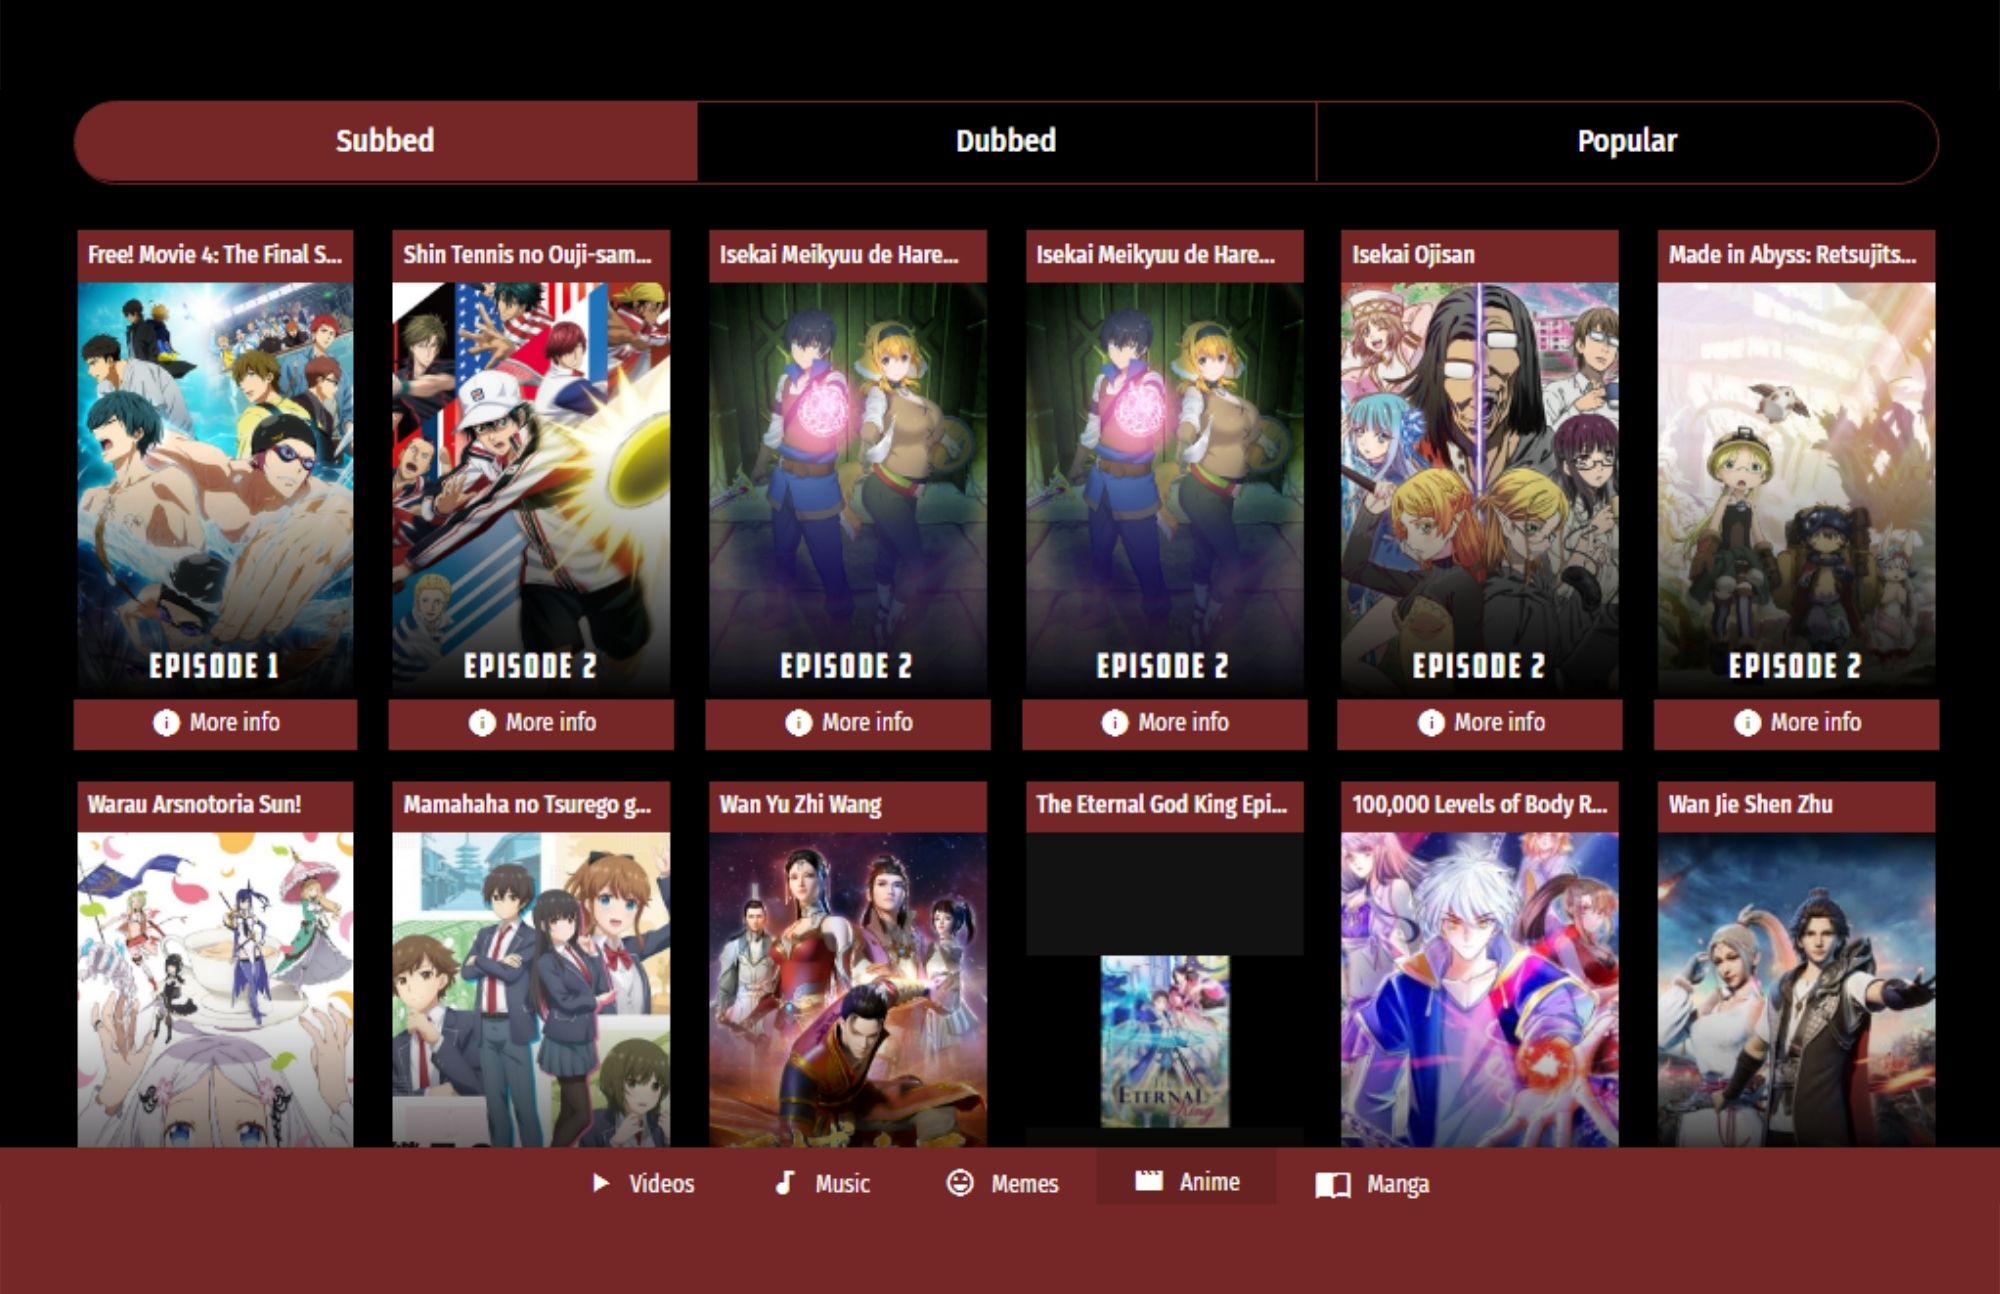 SimplyAWeeb Anime Category screenshot with three groups of anime listed above such as Subbed, Dubbed, and Popular